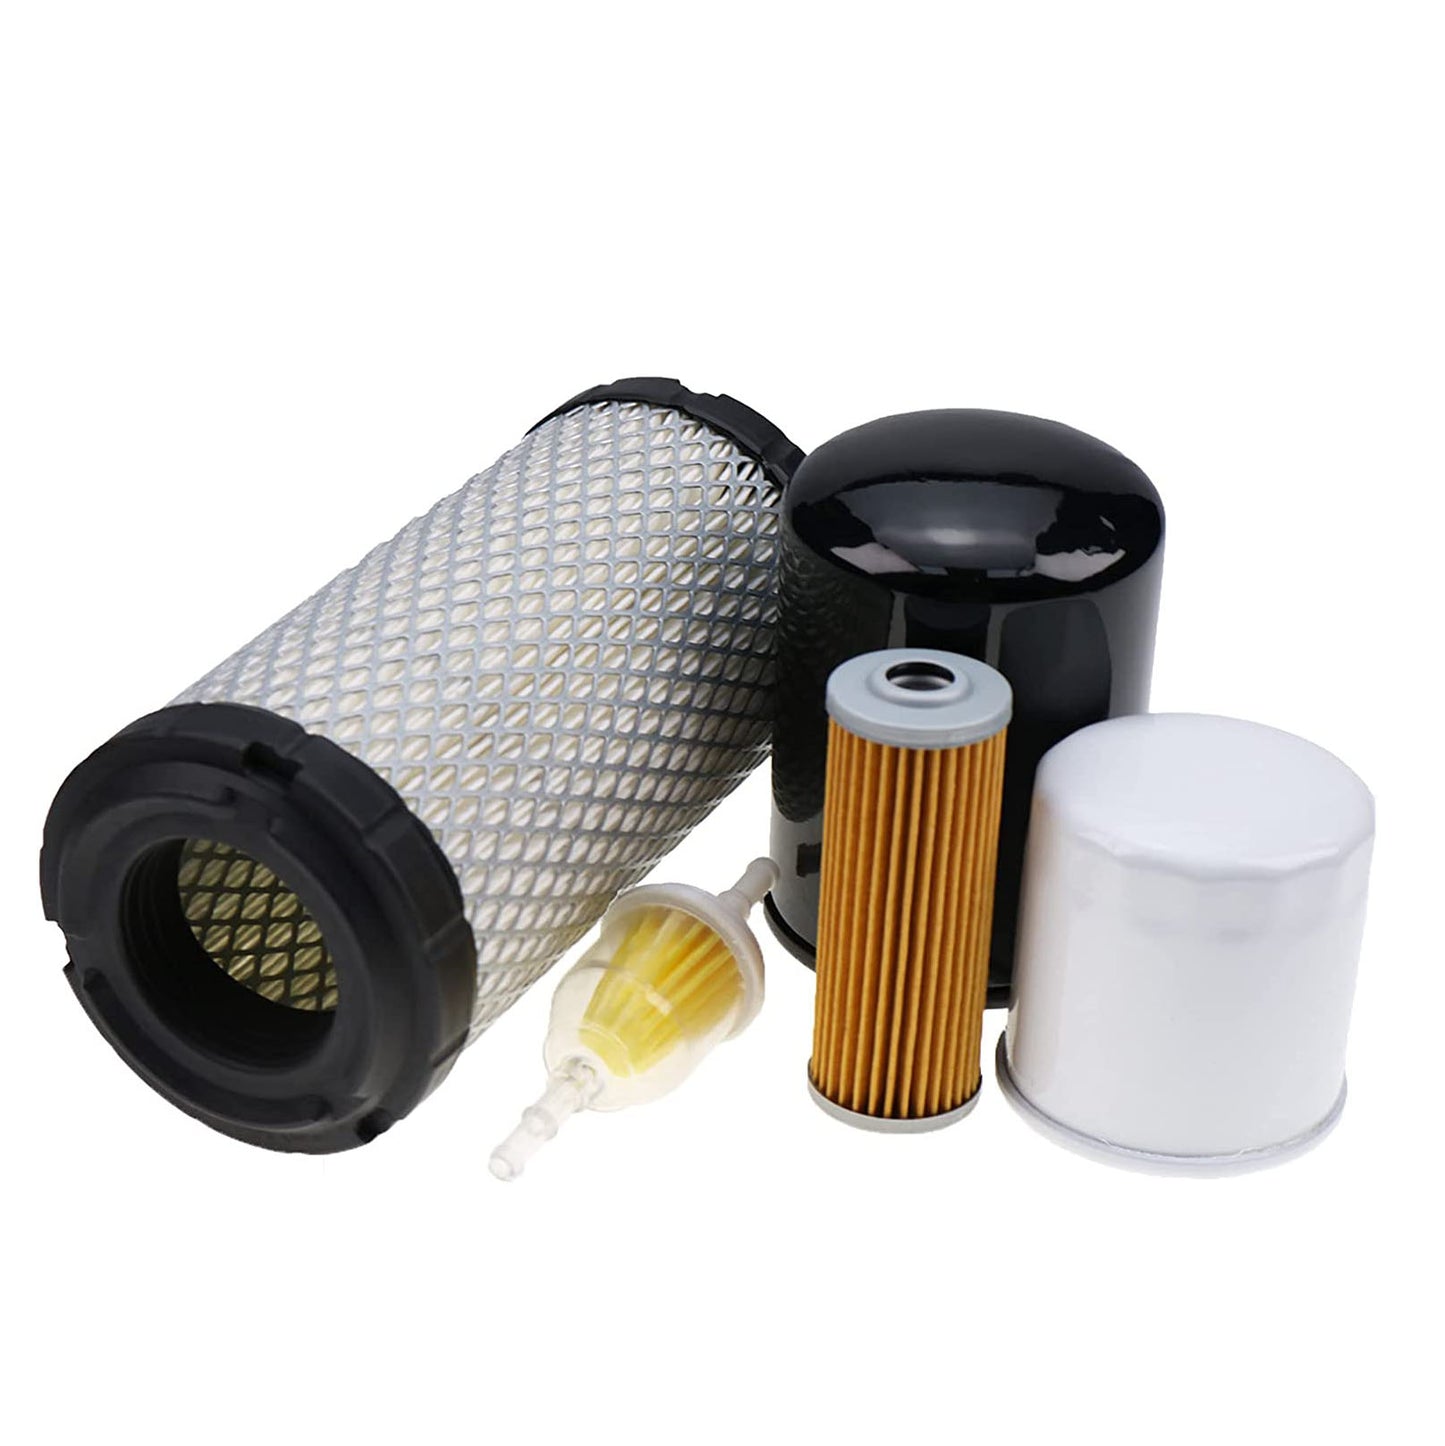 New LVA21035 Filter Kit Compatible with John Deere 1023E 1026R Compact Utility Tractor